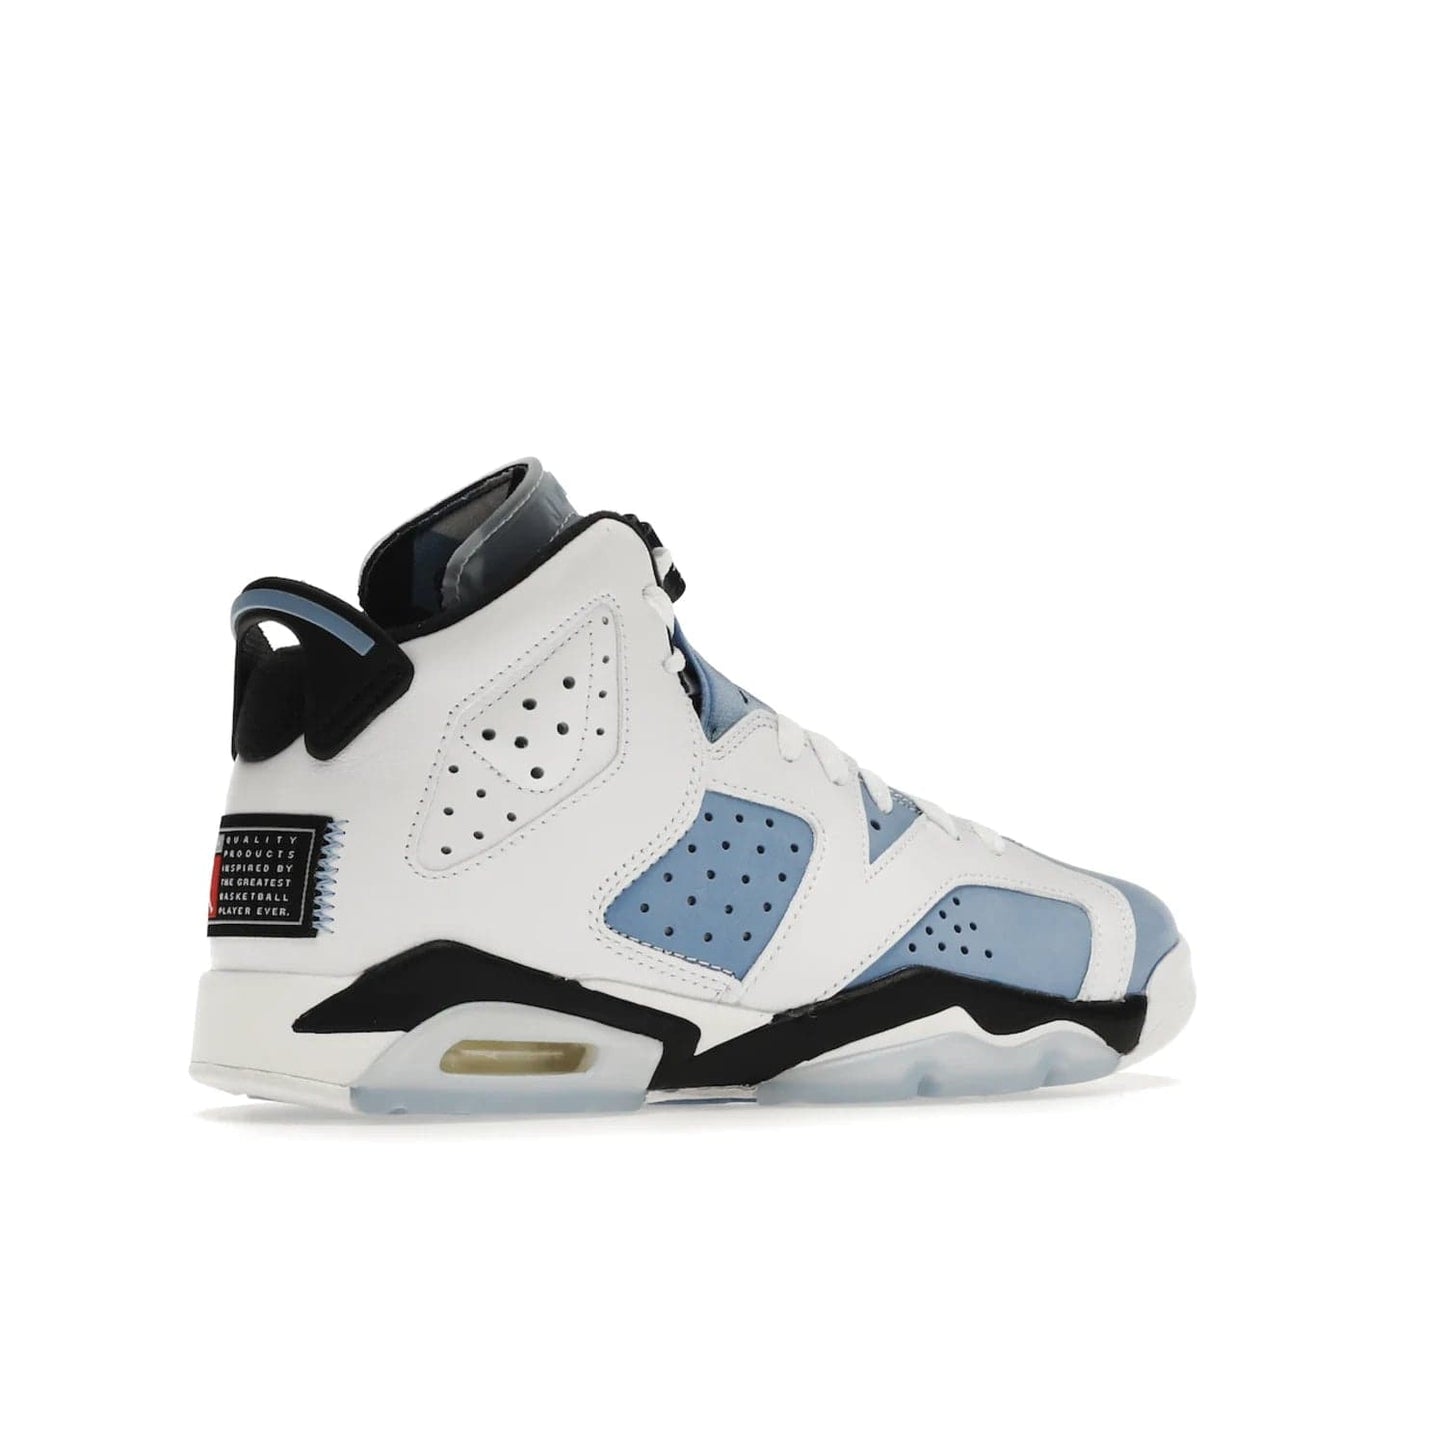 Jordan 6 Retro UNC White (GS) - Image 34 - Only at www.BallersClubKickz.com - Air Jordan 6 Retro UNC White GS: Michael Jordan alma mater, UNC Tar Heels, featuring colorway, nubuck, leather, Jumpman branding and a visible Air unit. Translucent blue/white outsole, perfect for completing sneaker rotation.